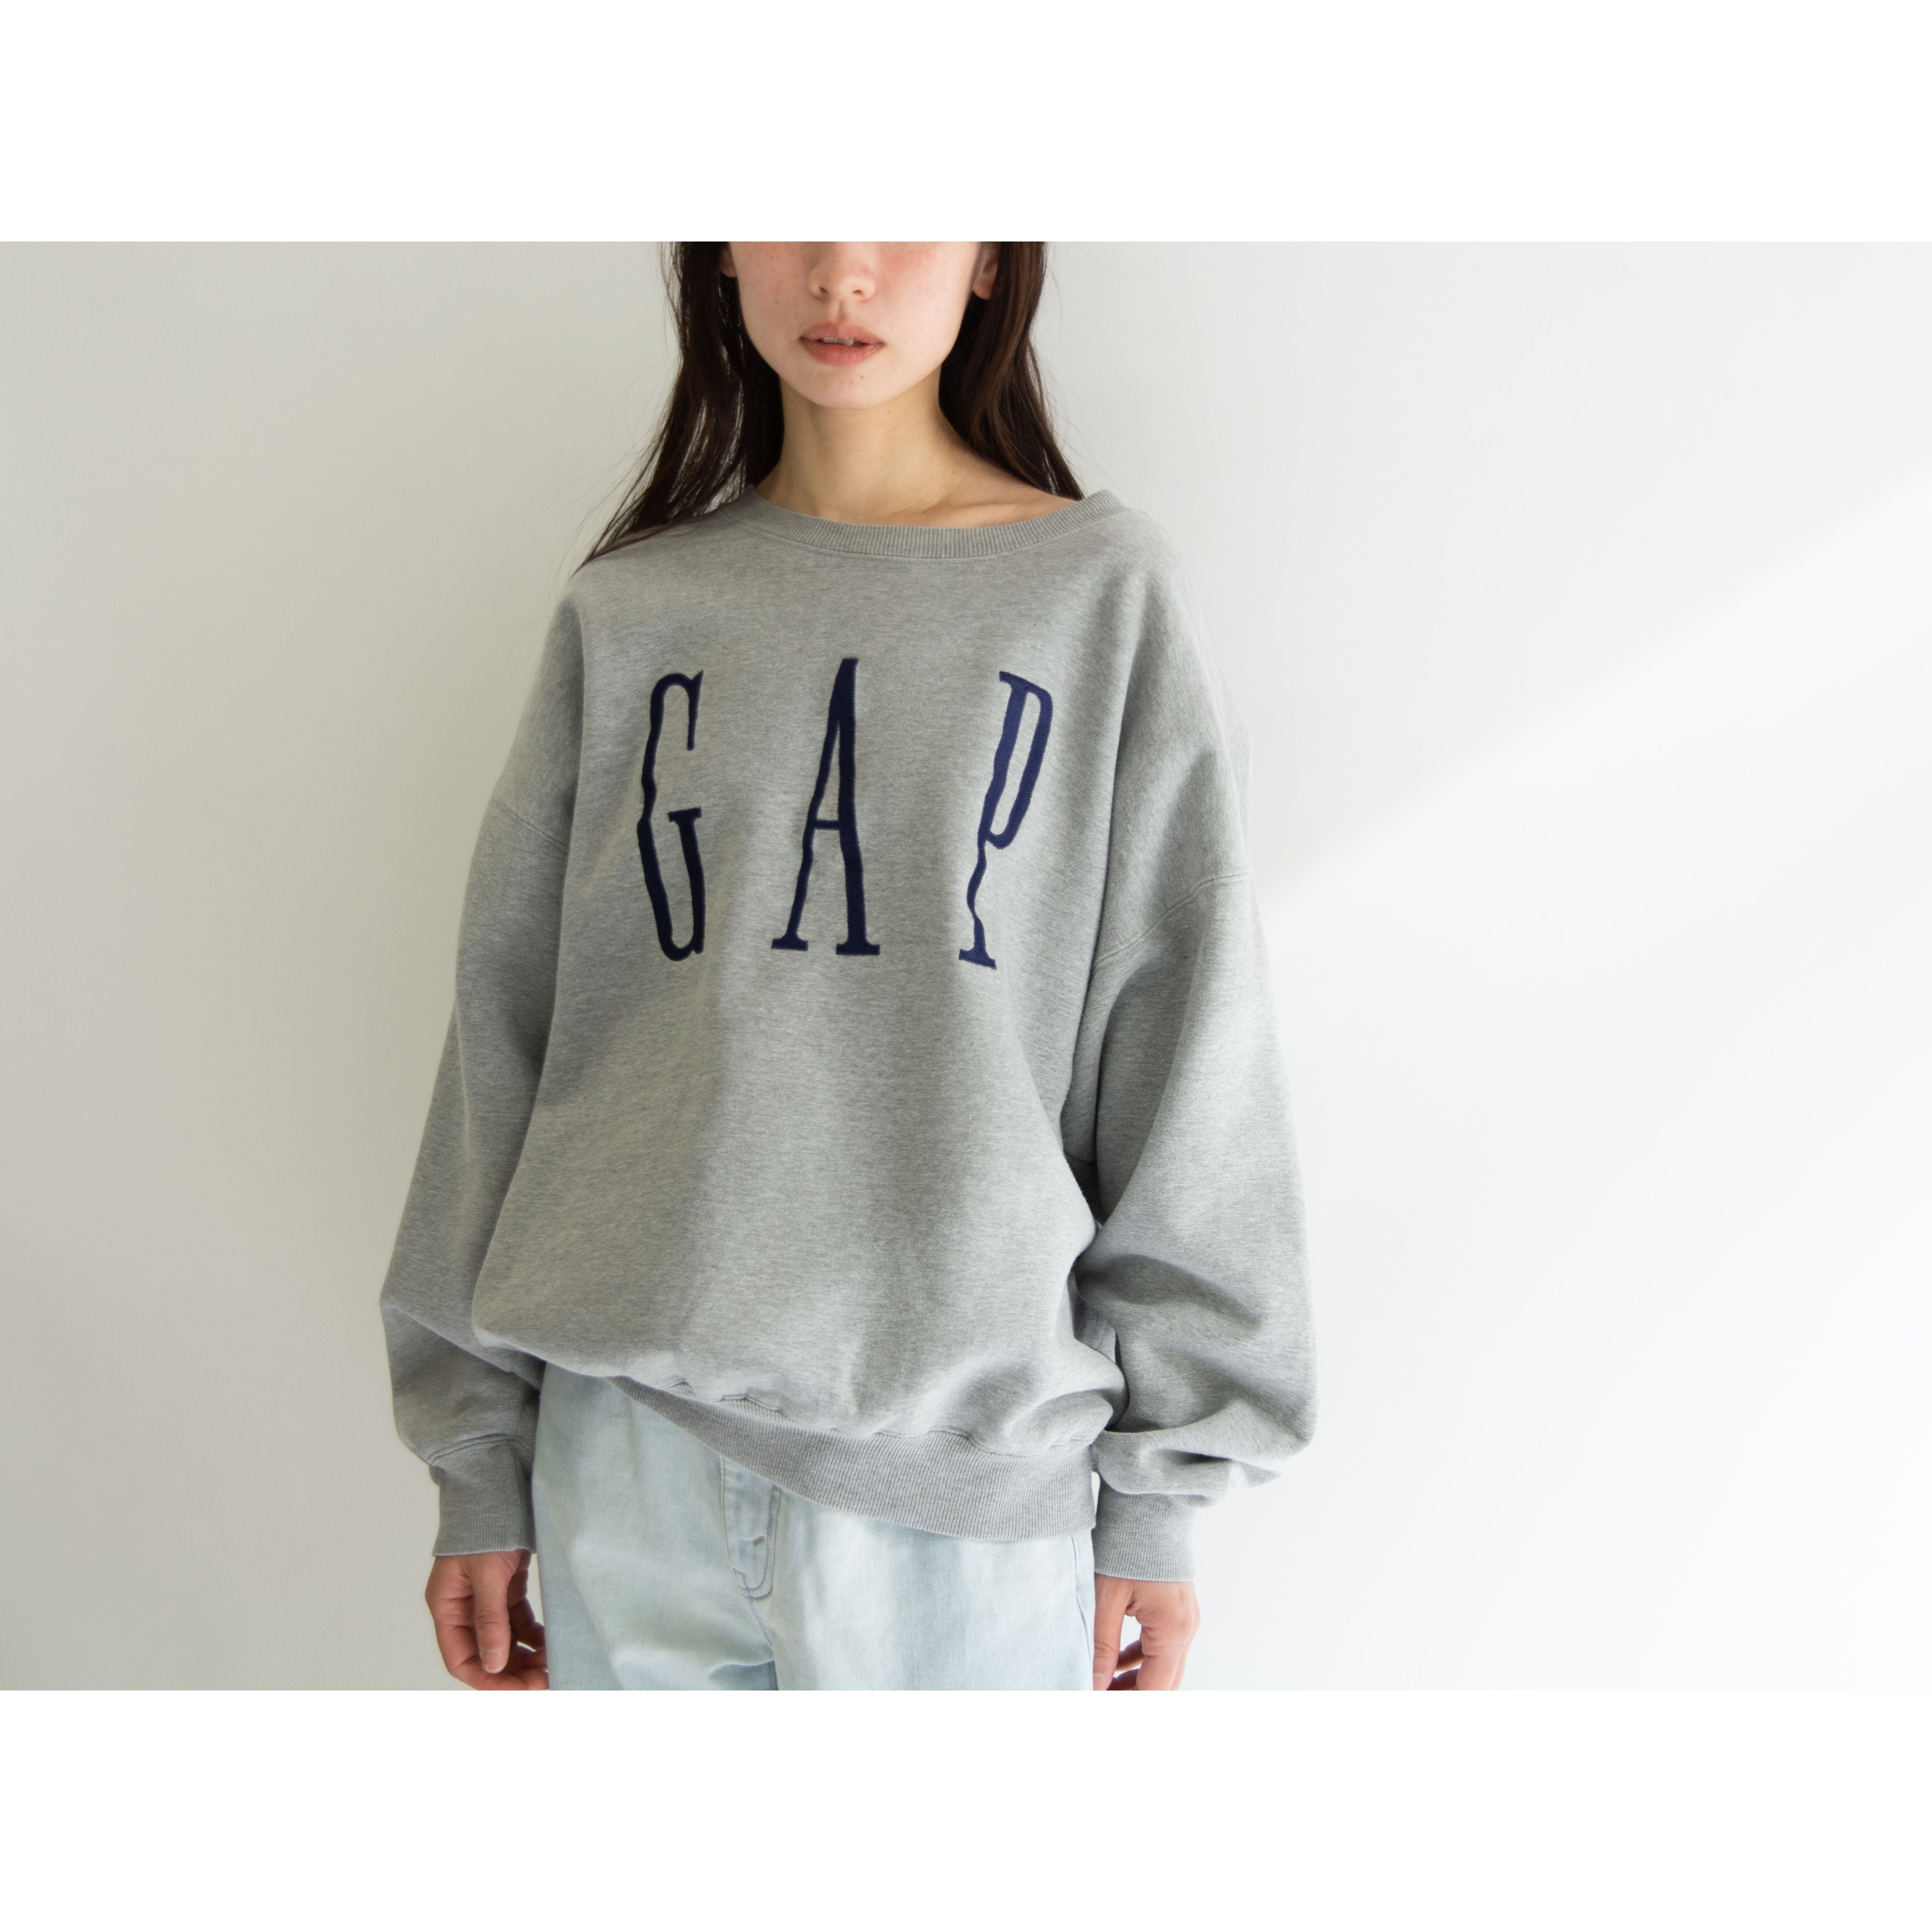 GAP】Made in Korea 80-90's Cotton-Polyester Sweat Shirt L